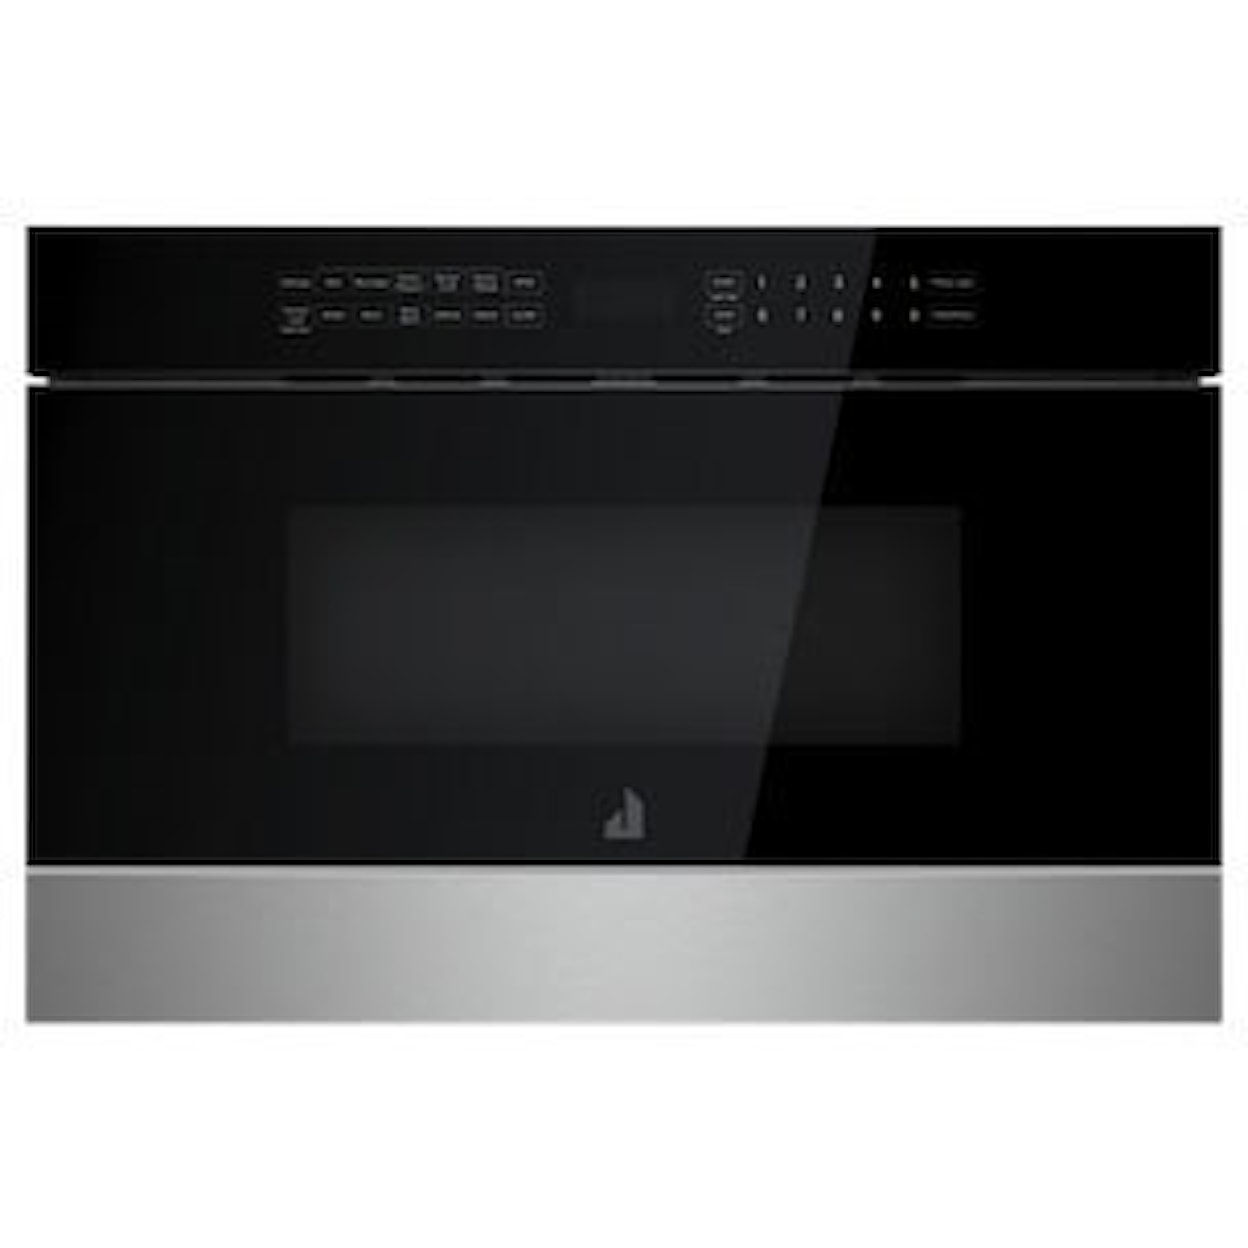 Jenn-Air Microwaves 24” Under Counter Microwave Oven with Drawer